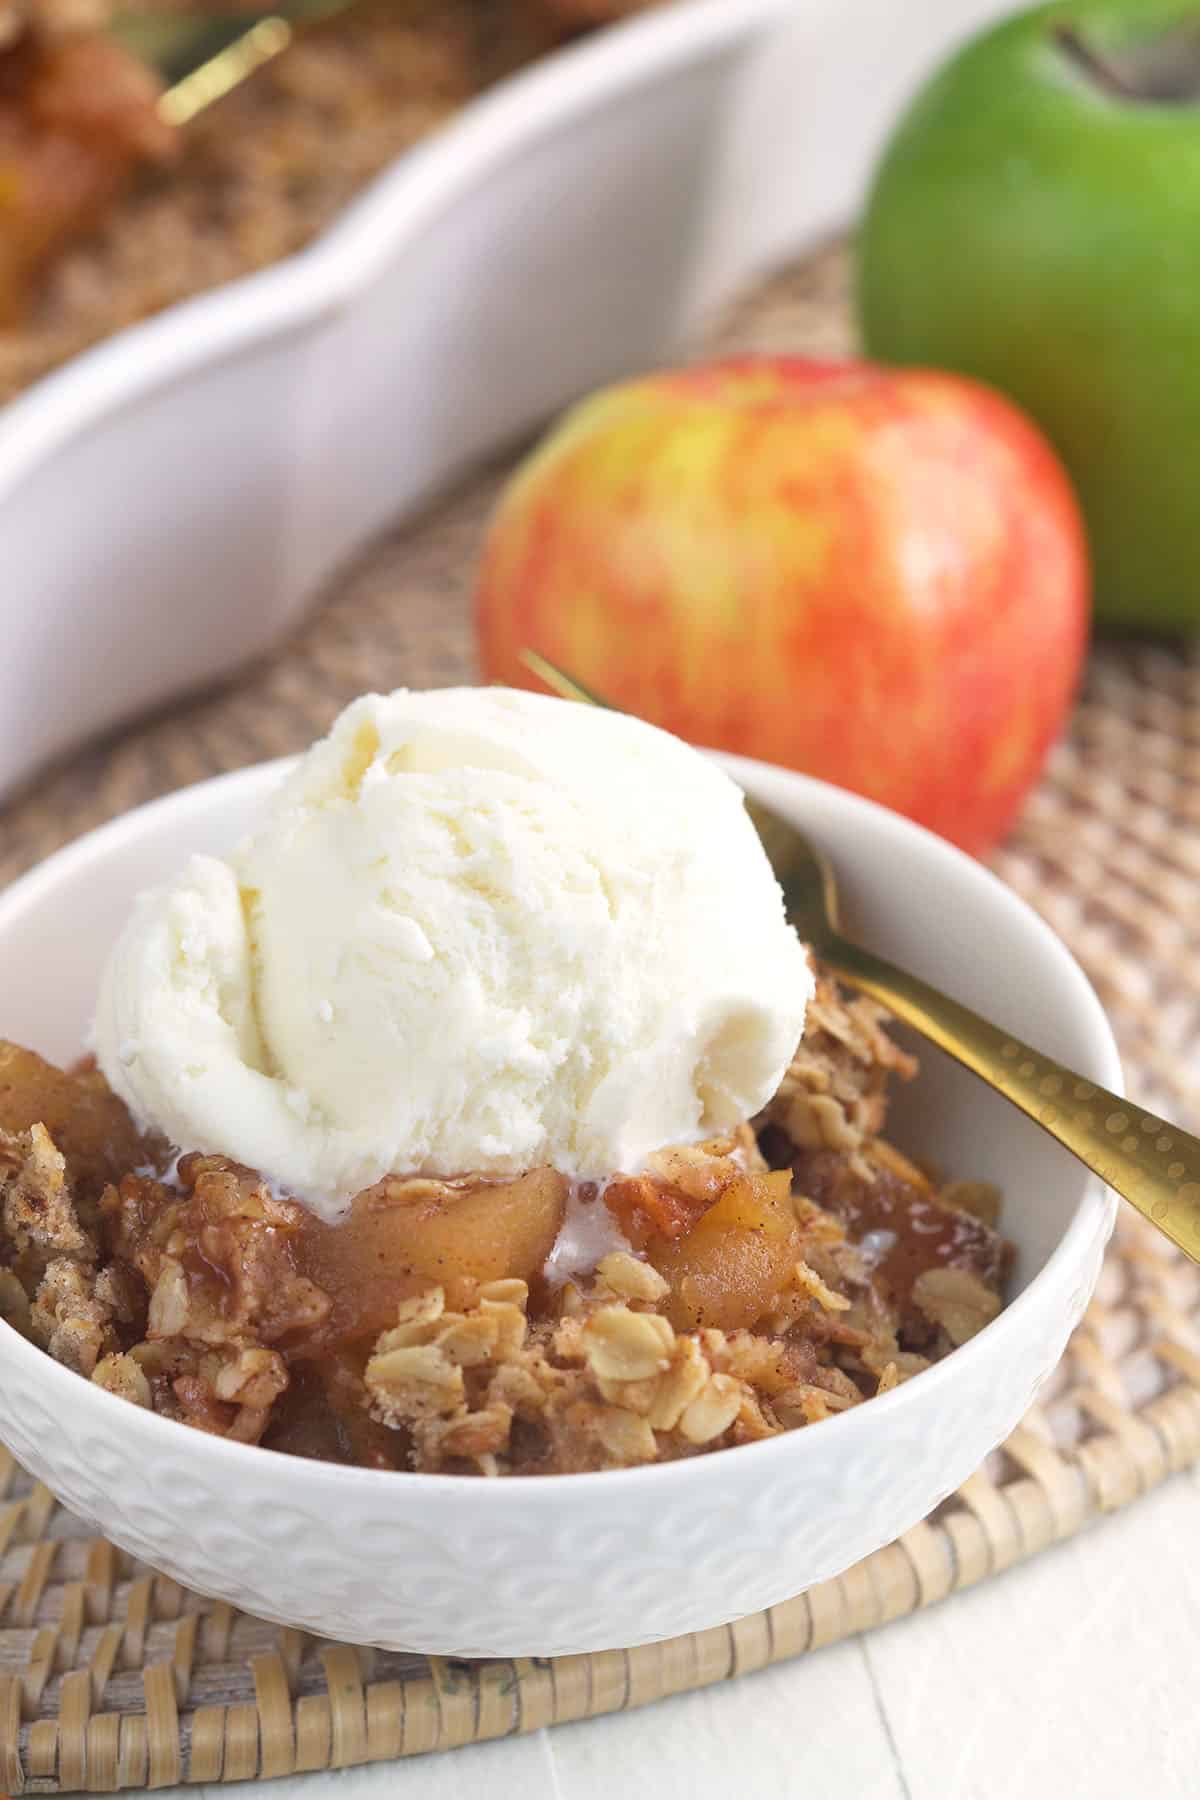 Apples are placed behind a bowl filled with apple crisp and ice cream. 